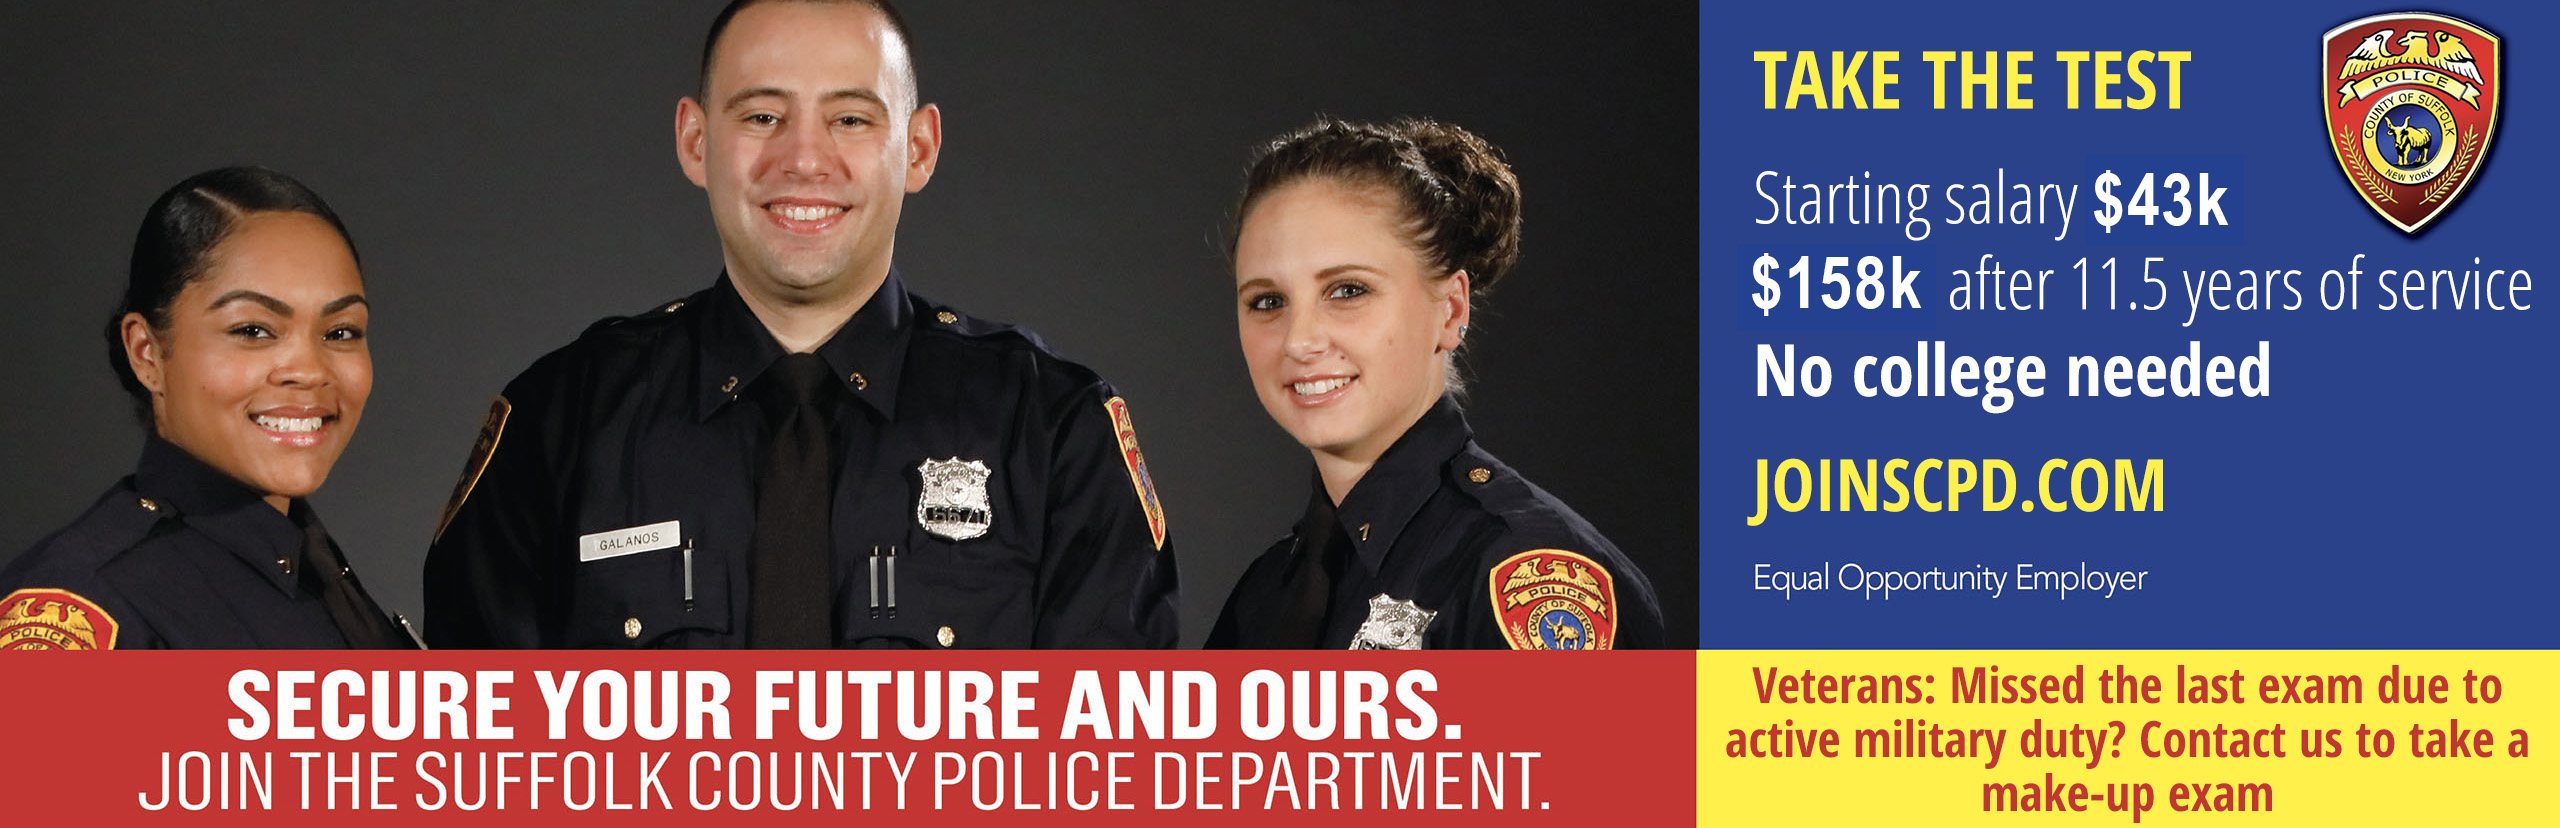 Secure your future and ours.  Join the Suffolk County Police Department.  Application Deadline is April 3, 2019